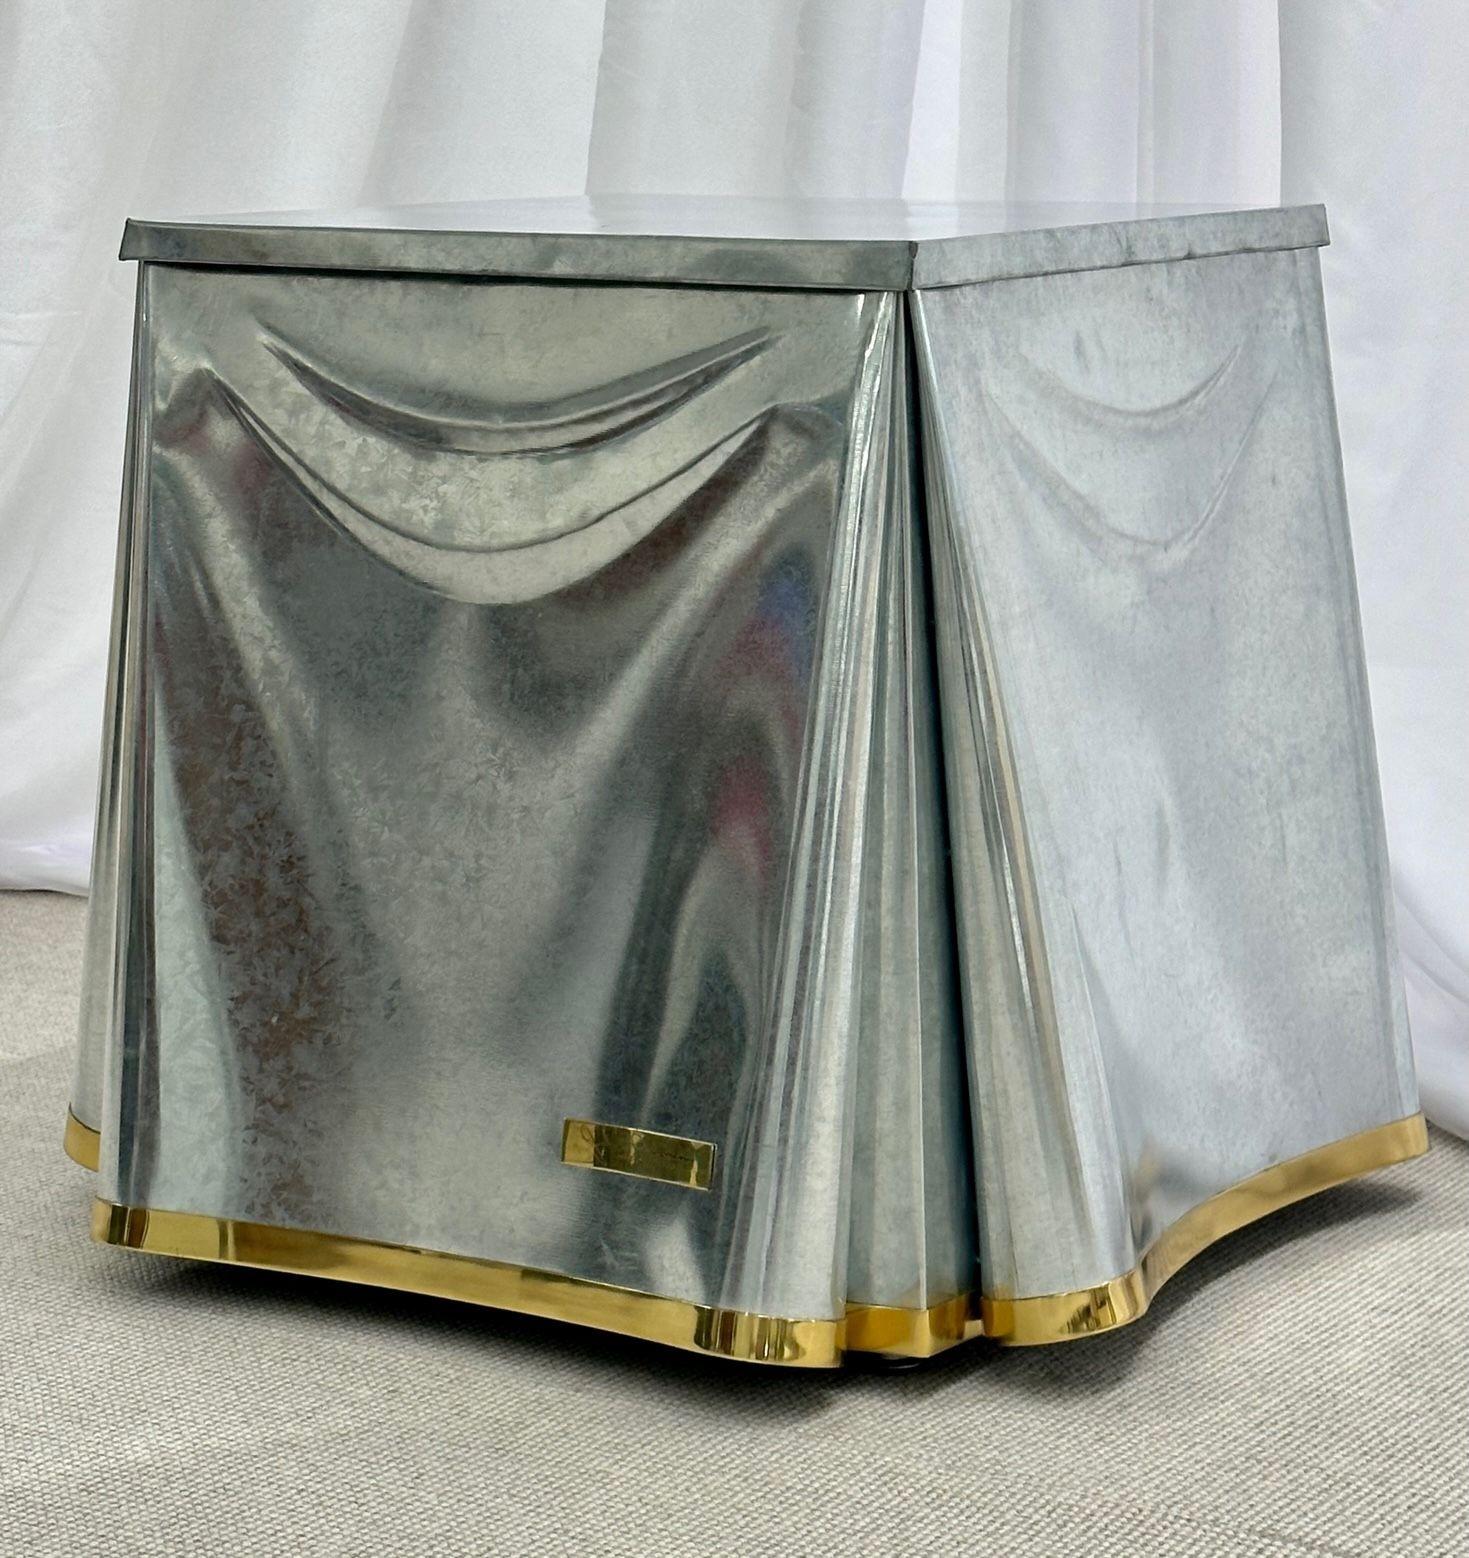 John Dickinson Mid-Century Modern Style Drape End Table, Galvanized Steel Signed

Priced well below site as well as market value is this fine work of this San Francisco-based designer and decorator incorporates striking originality and wit. The